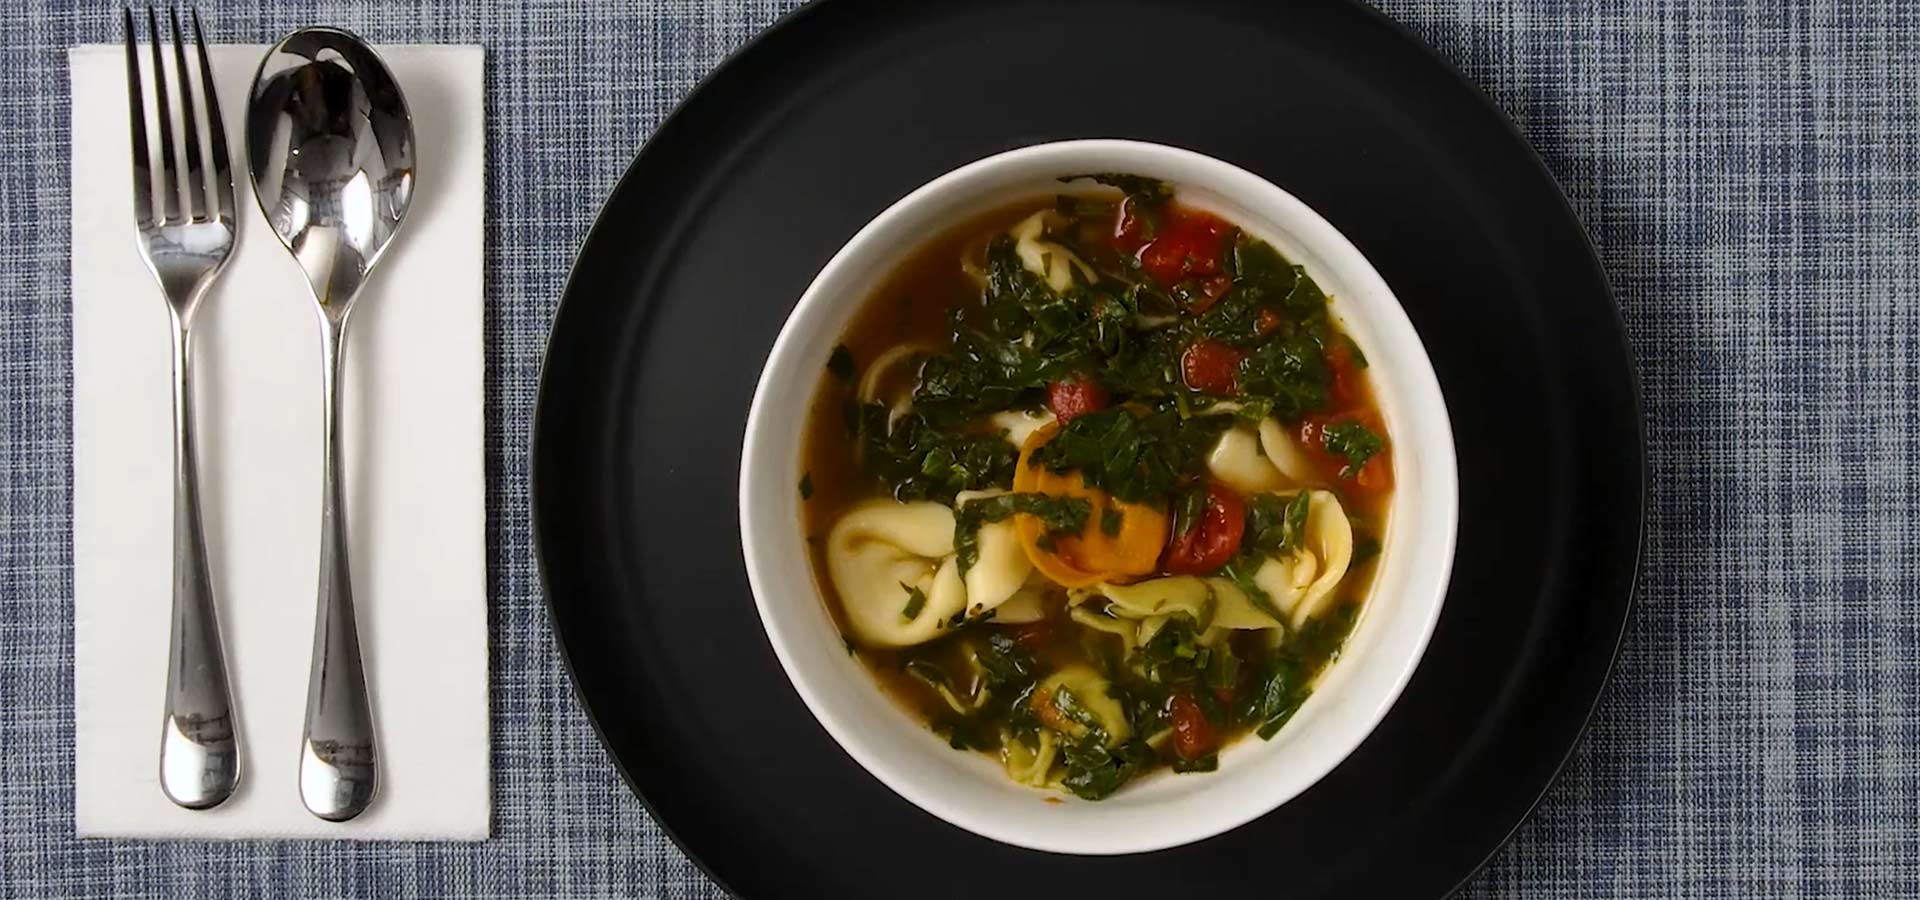 Simply Delicious Soup: Warm Up Your Home This Winter with a Hearty, Healthy Dish